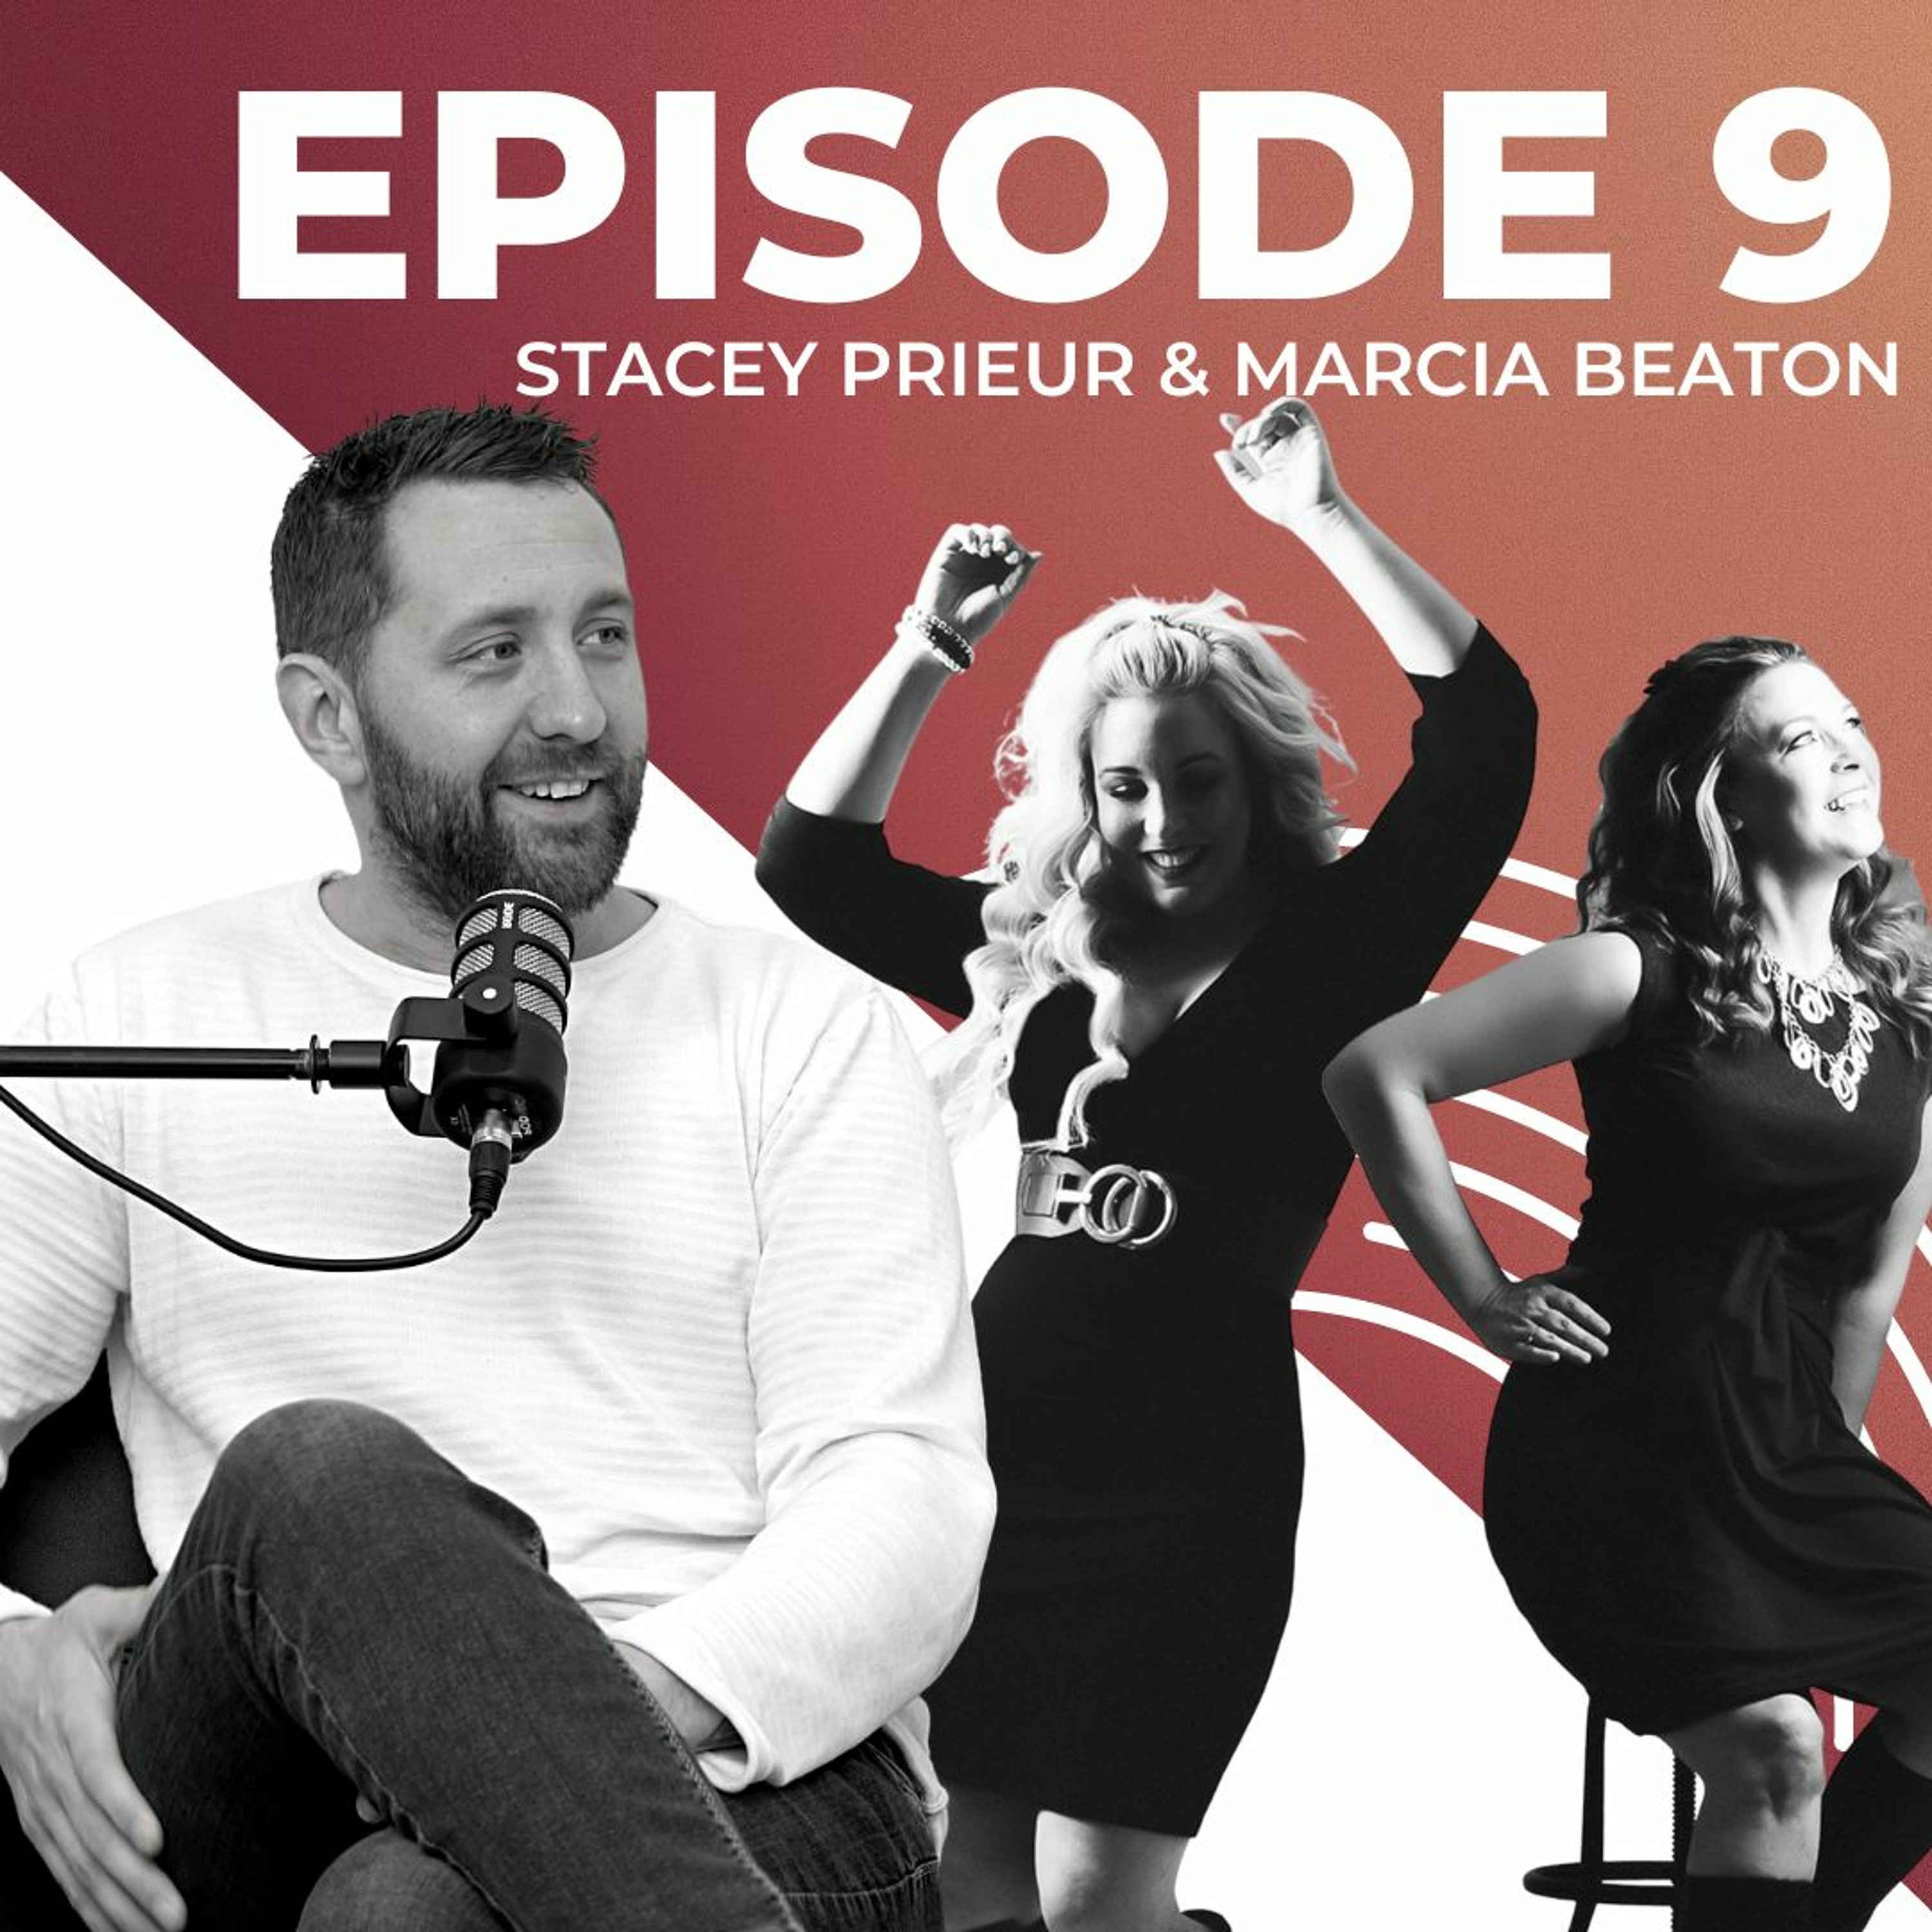 Stacey Prieur & Marcia Beaton - BEREVELUTIONARY EP. 9